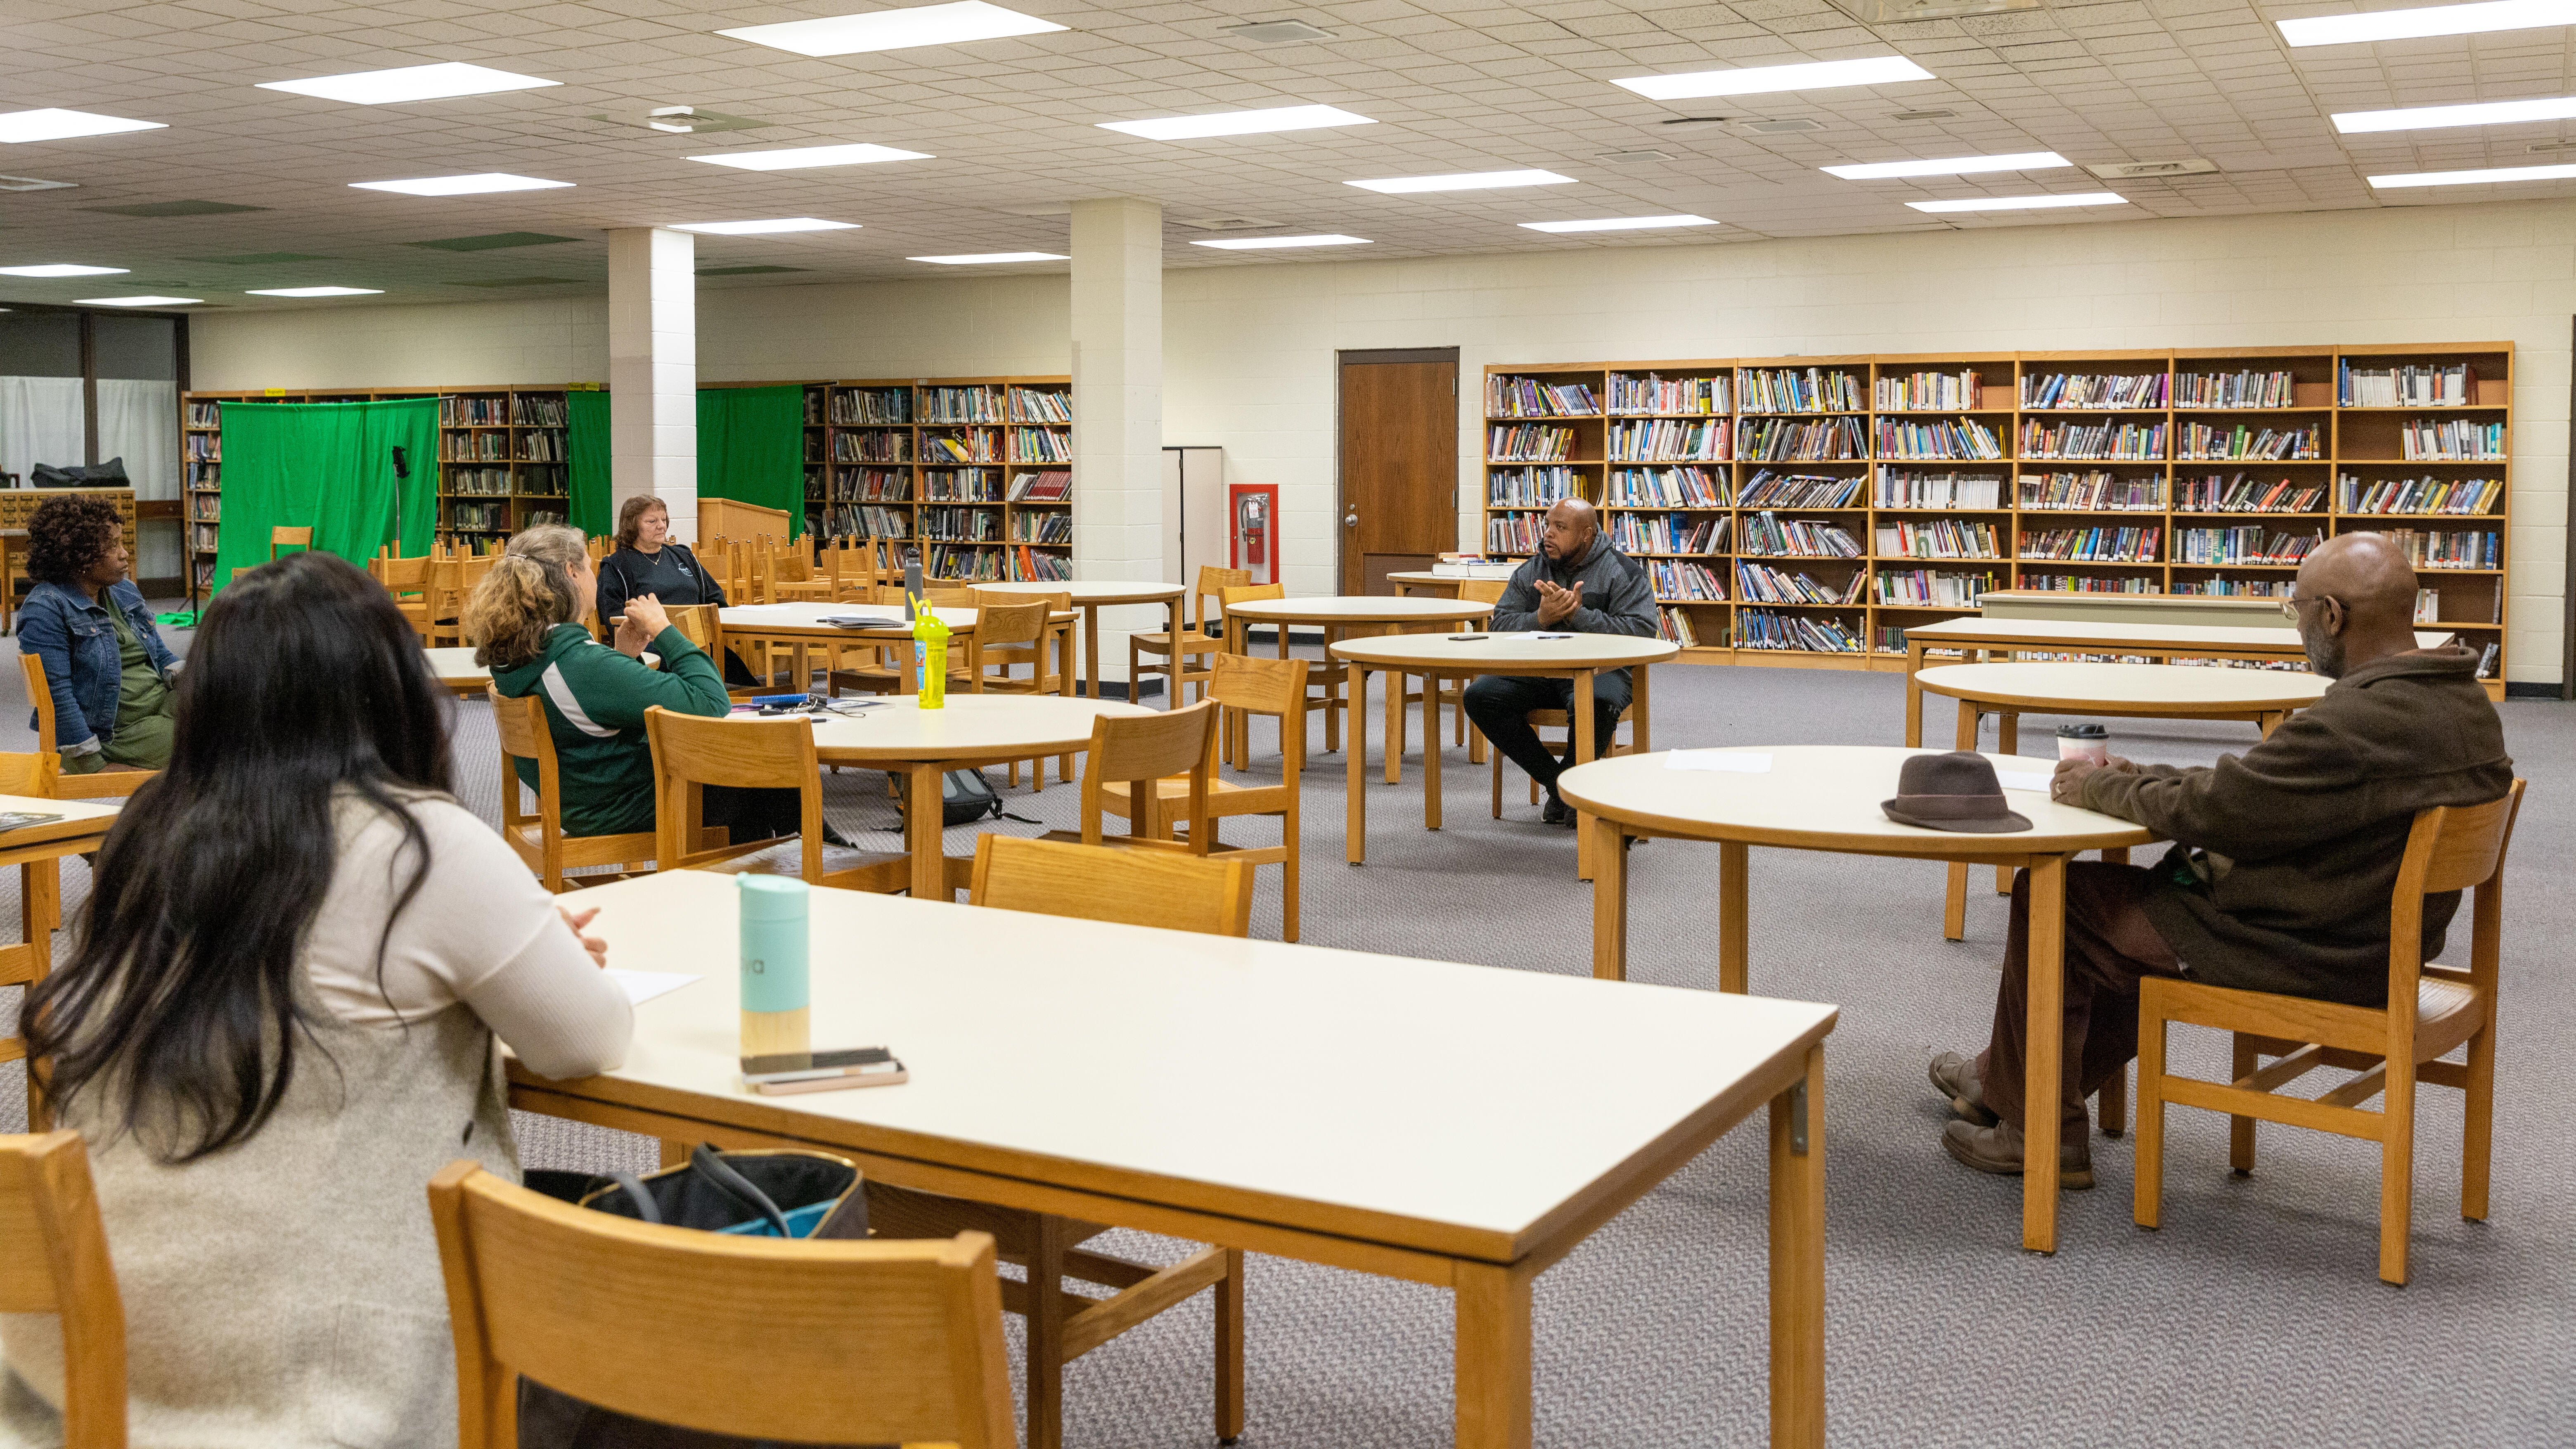 Members of the A-TSI committee meeting sit and talk during a recent gathering in the high school library.